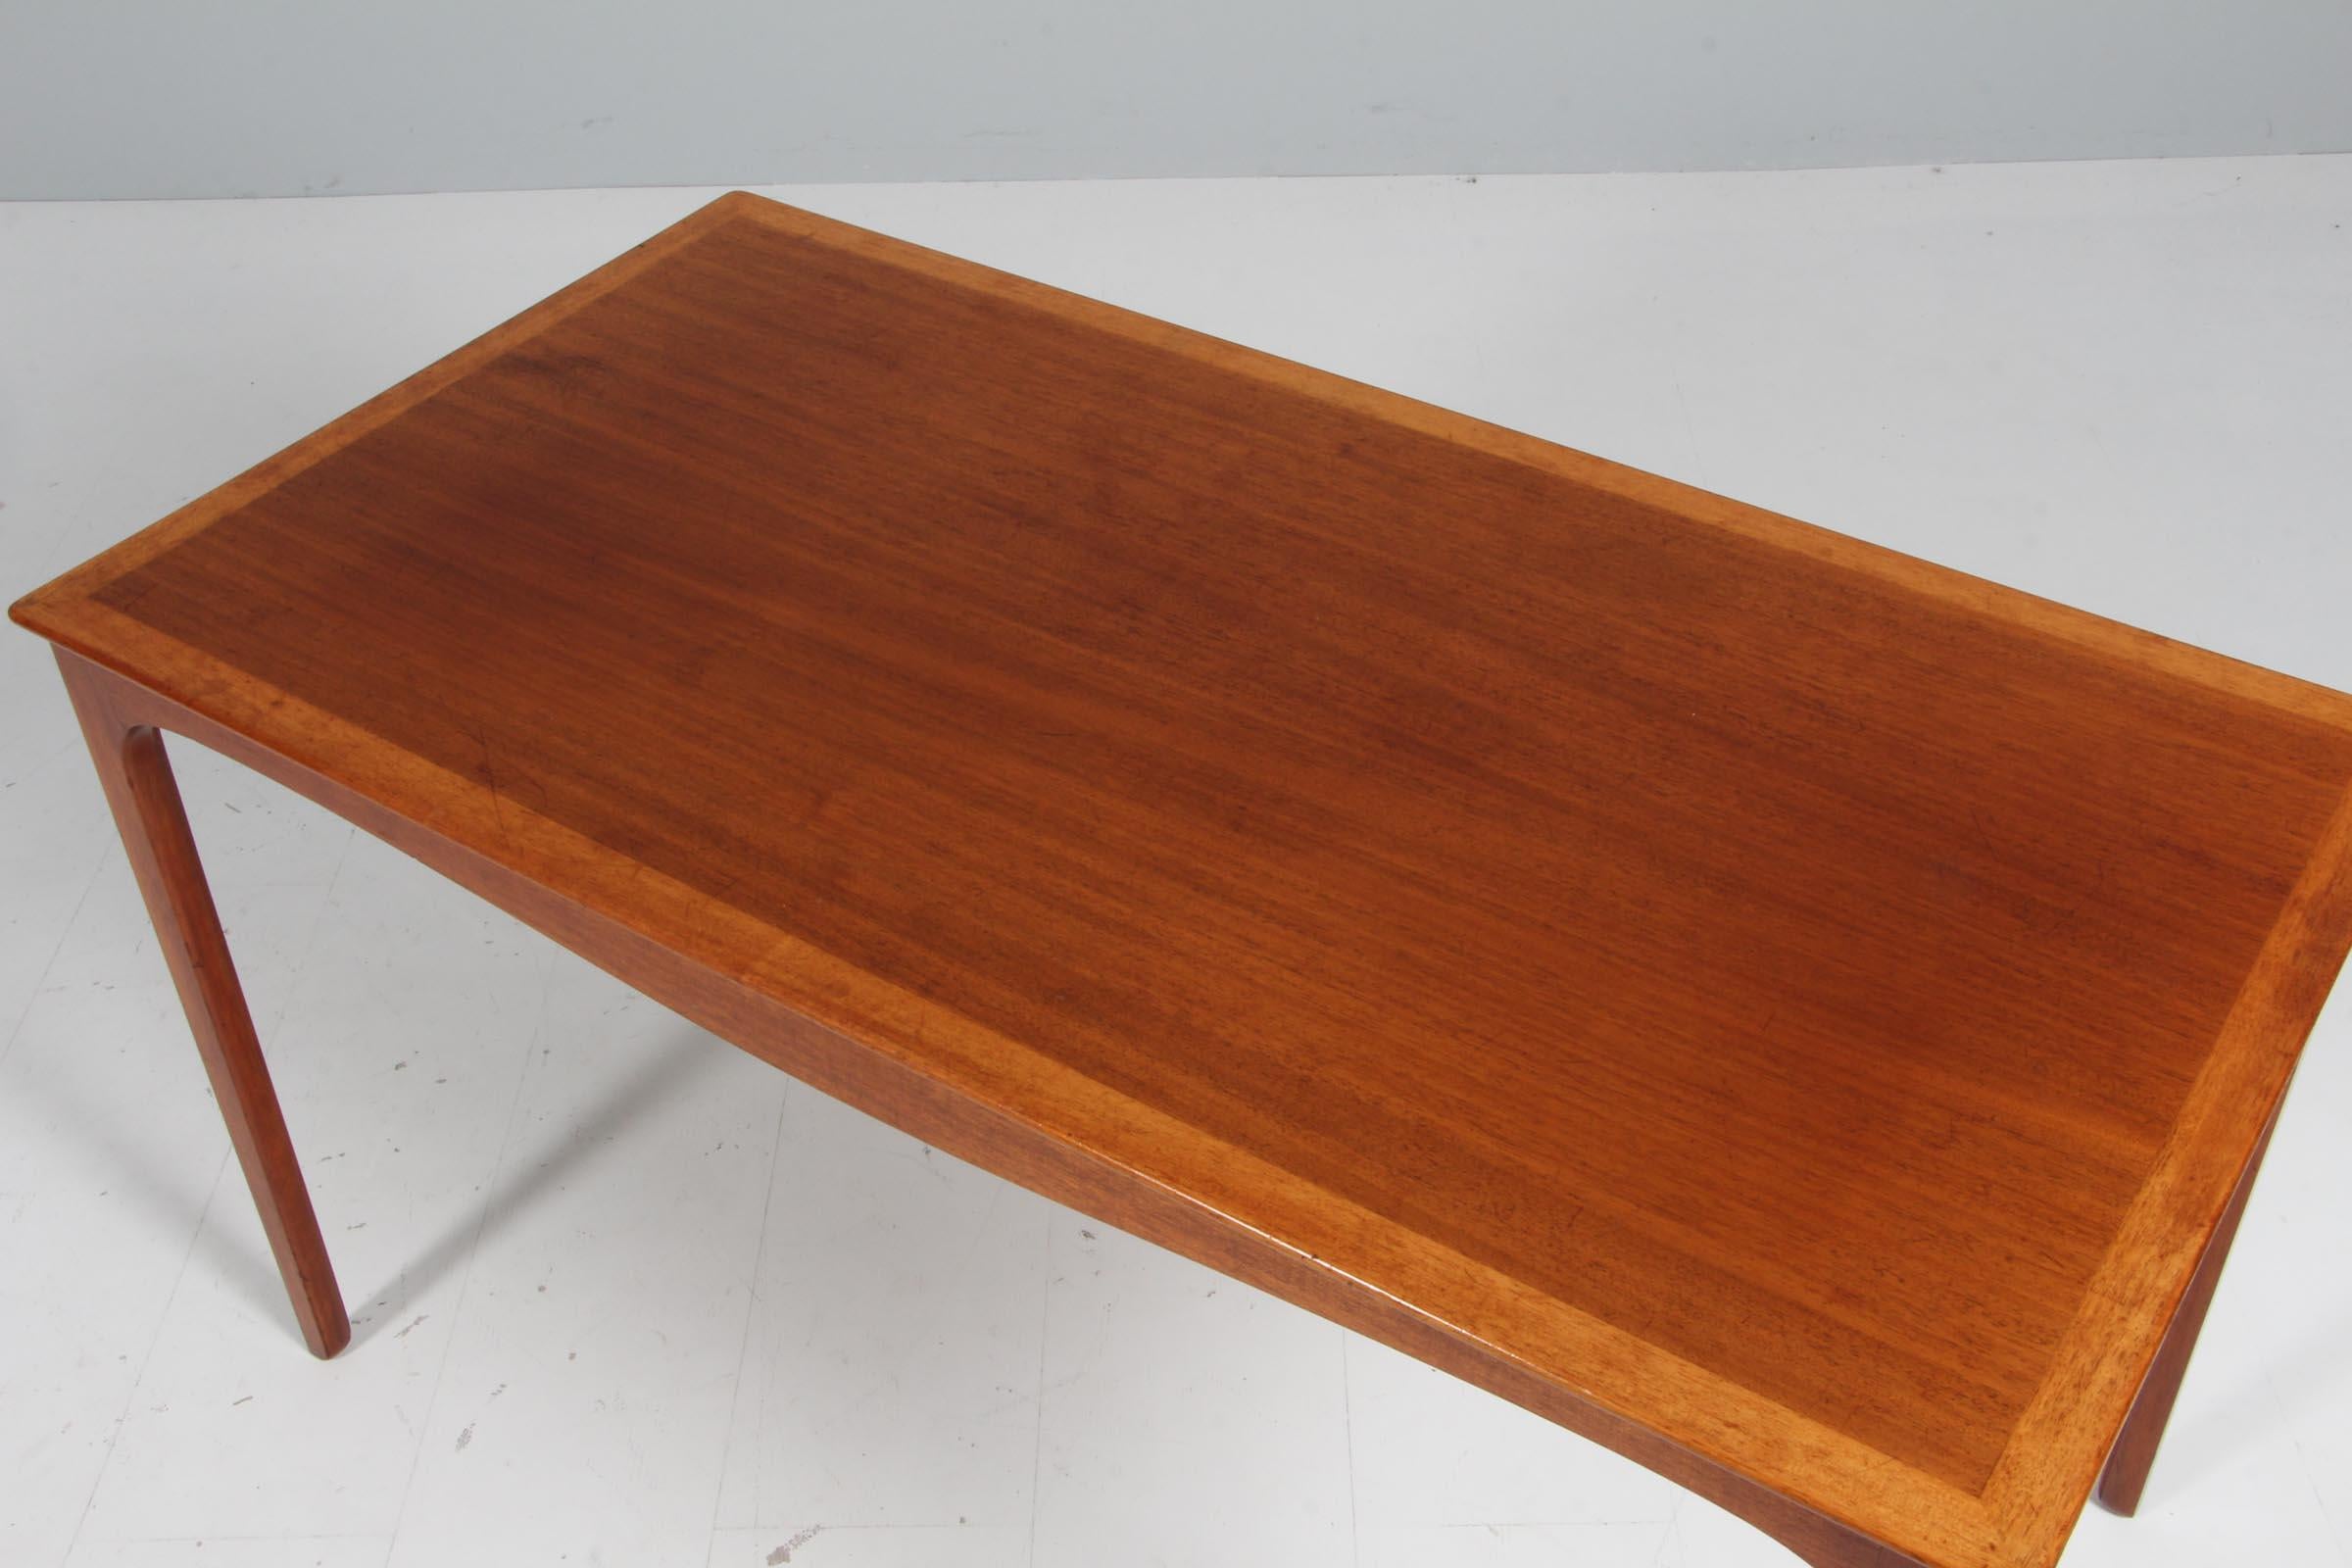 Ole Wanscher Coffee Table, Mahogany, A. J. Iversen In Good Condition For Sale In Esbjerg, DK